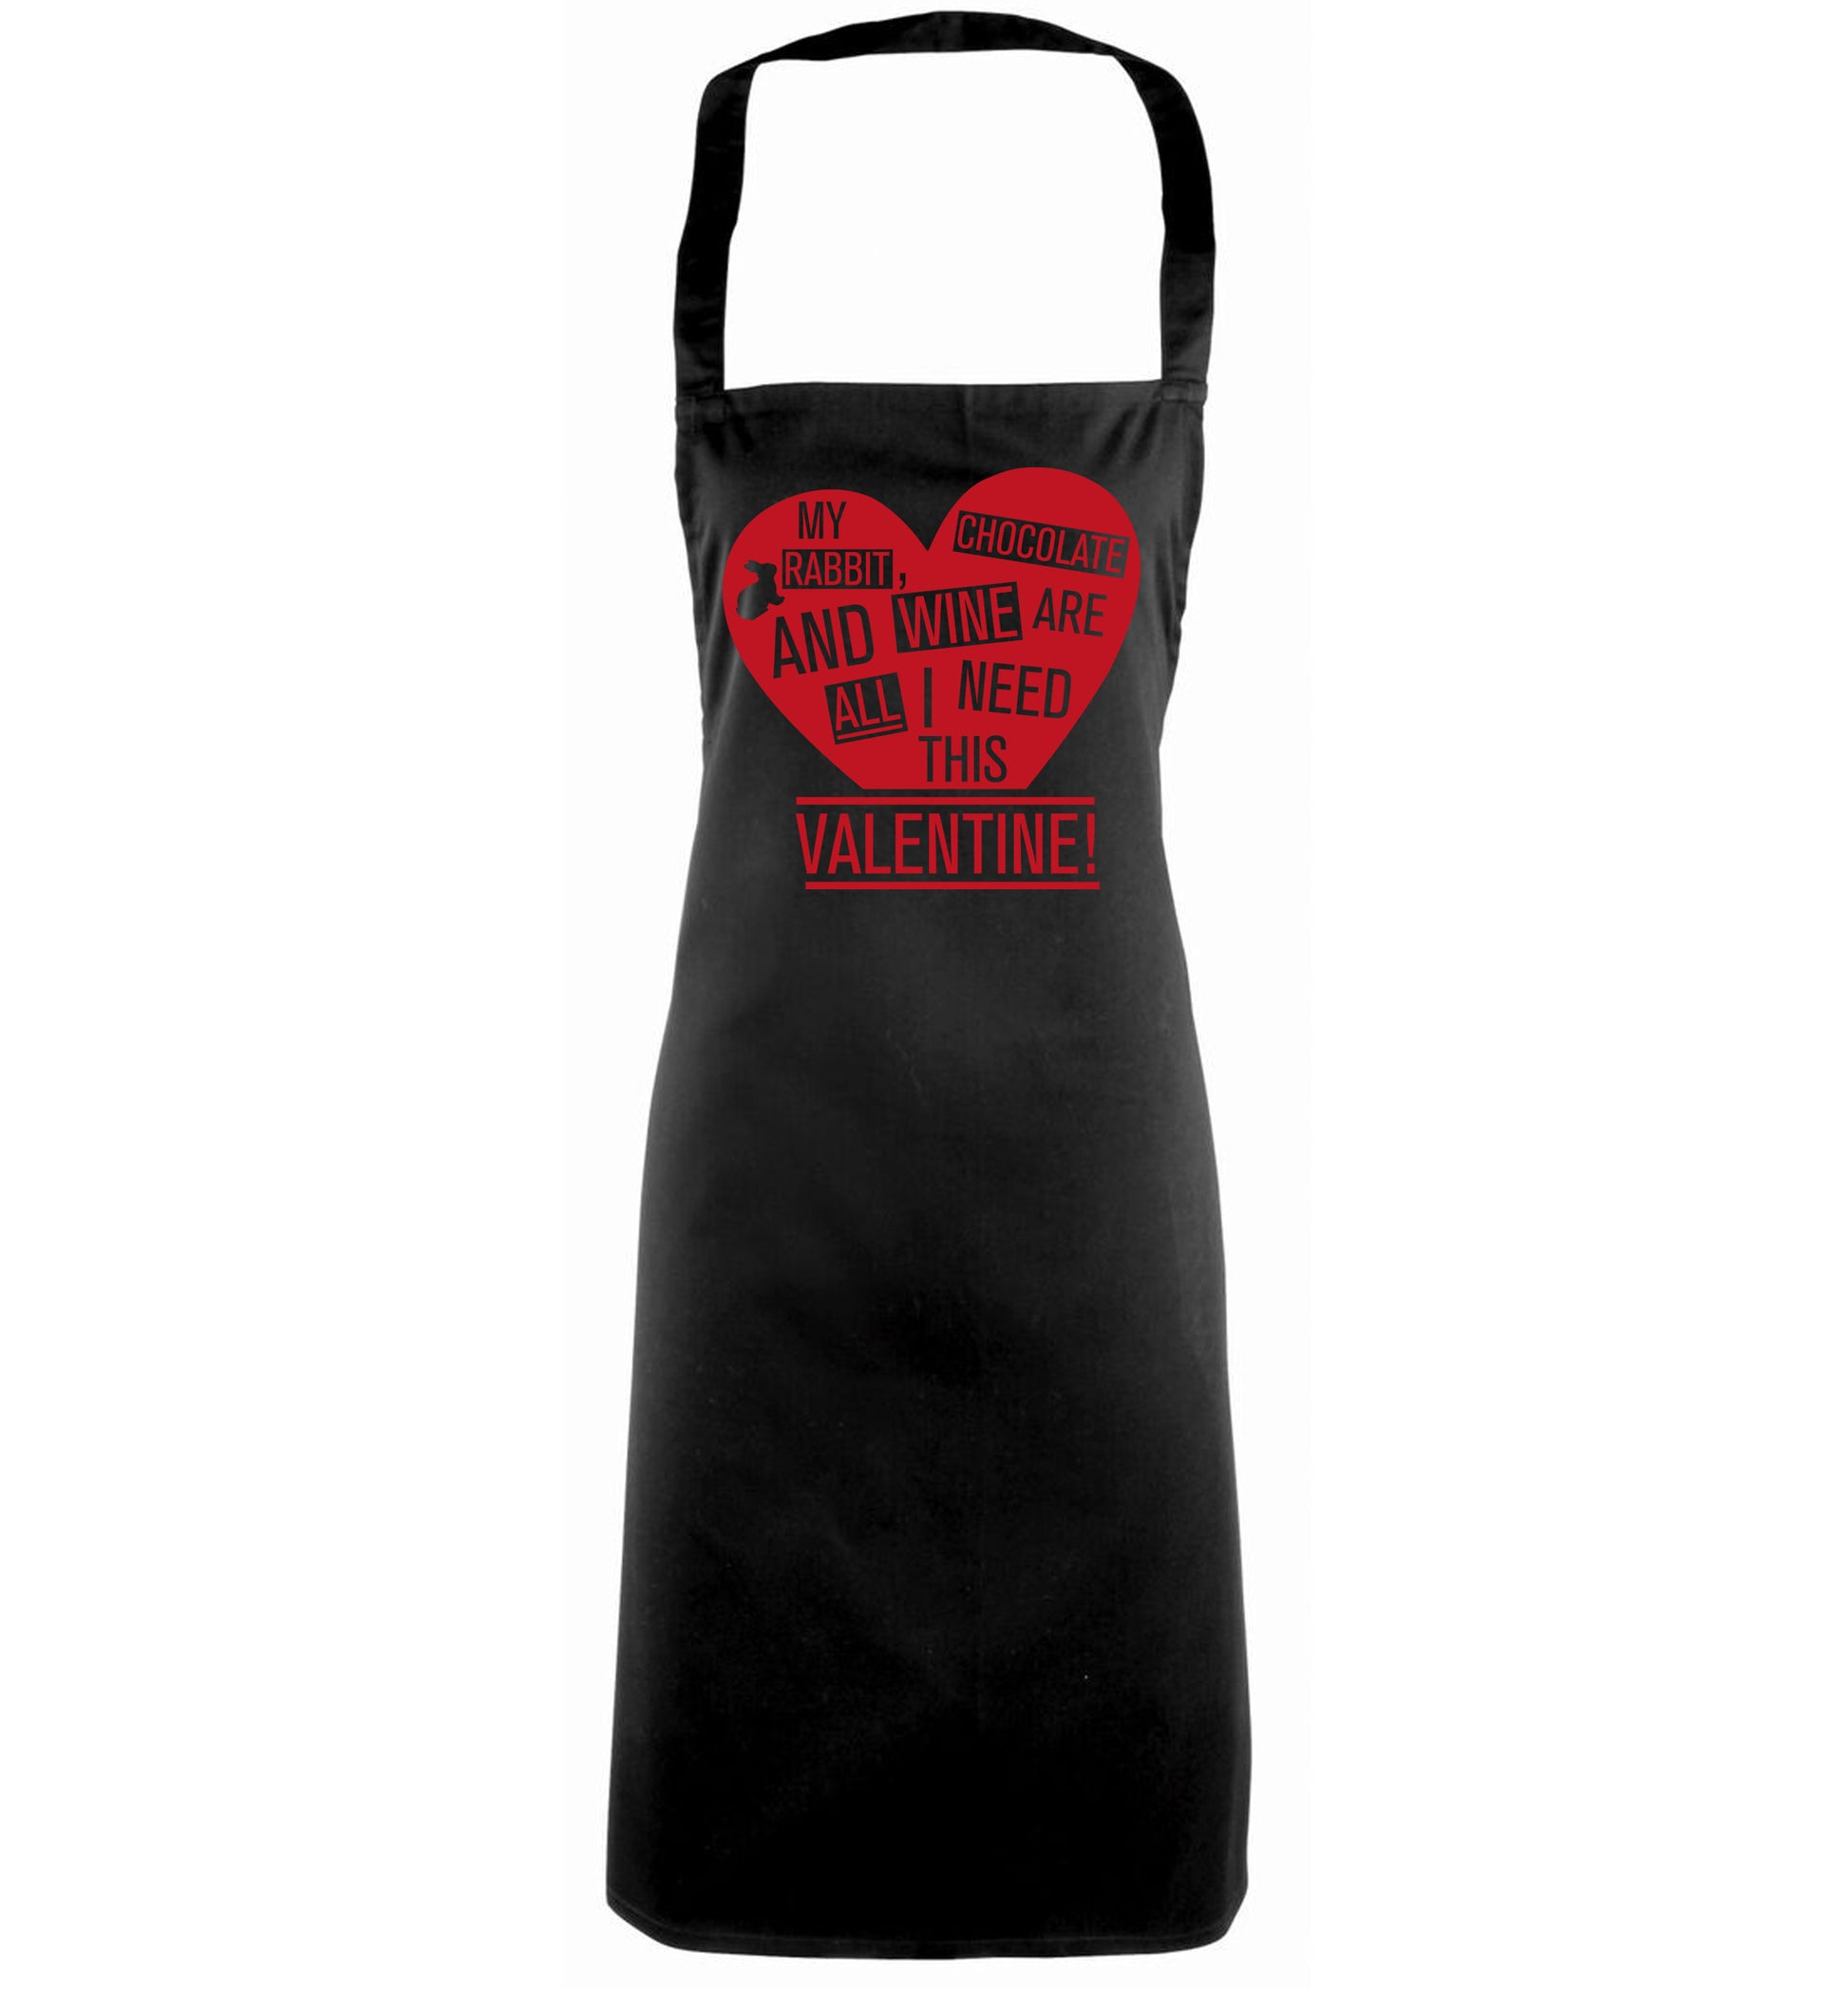 My rabbit, chocolate and wine are all I need this valentine! black apron